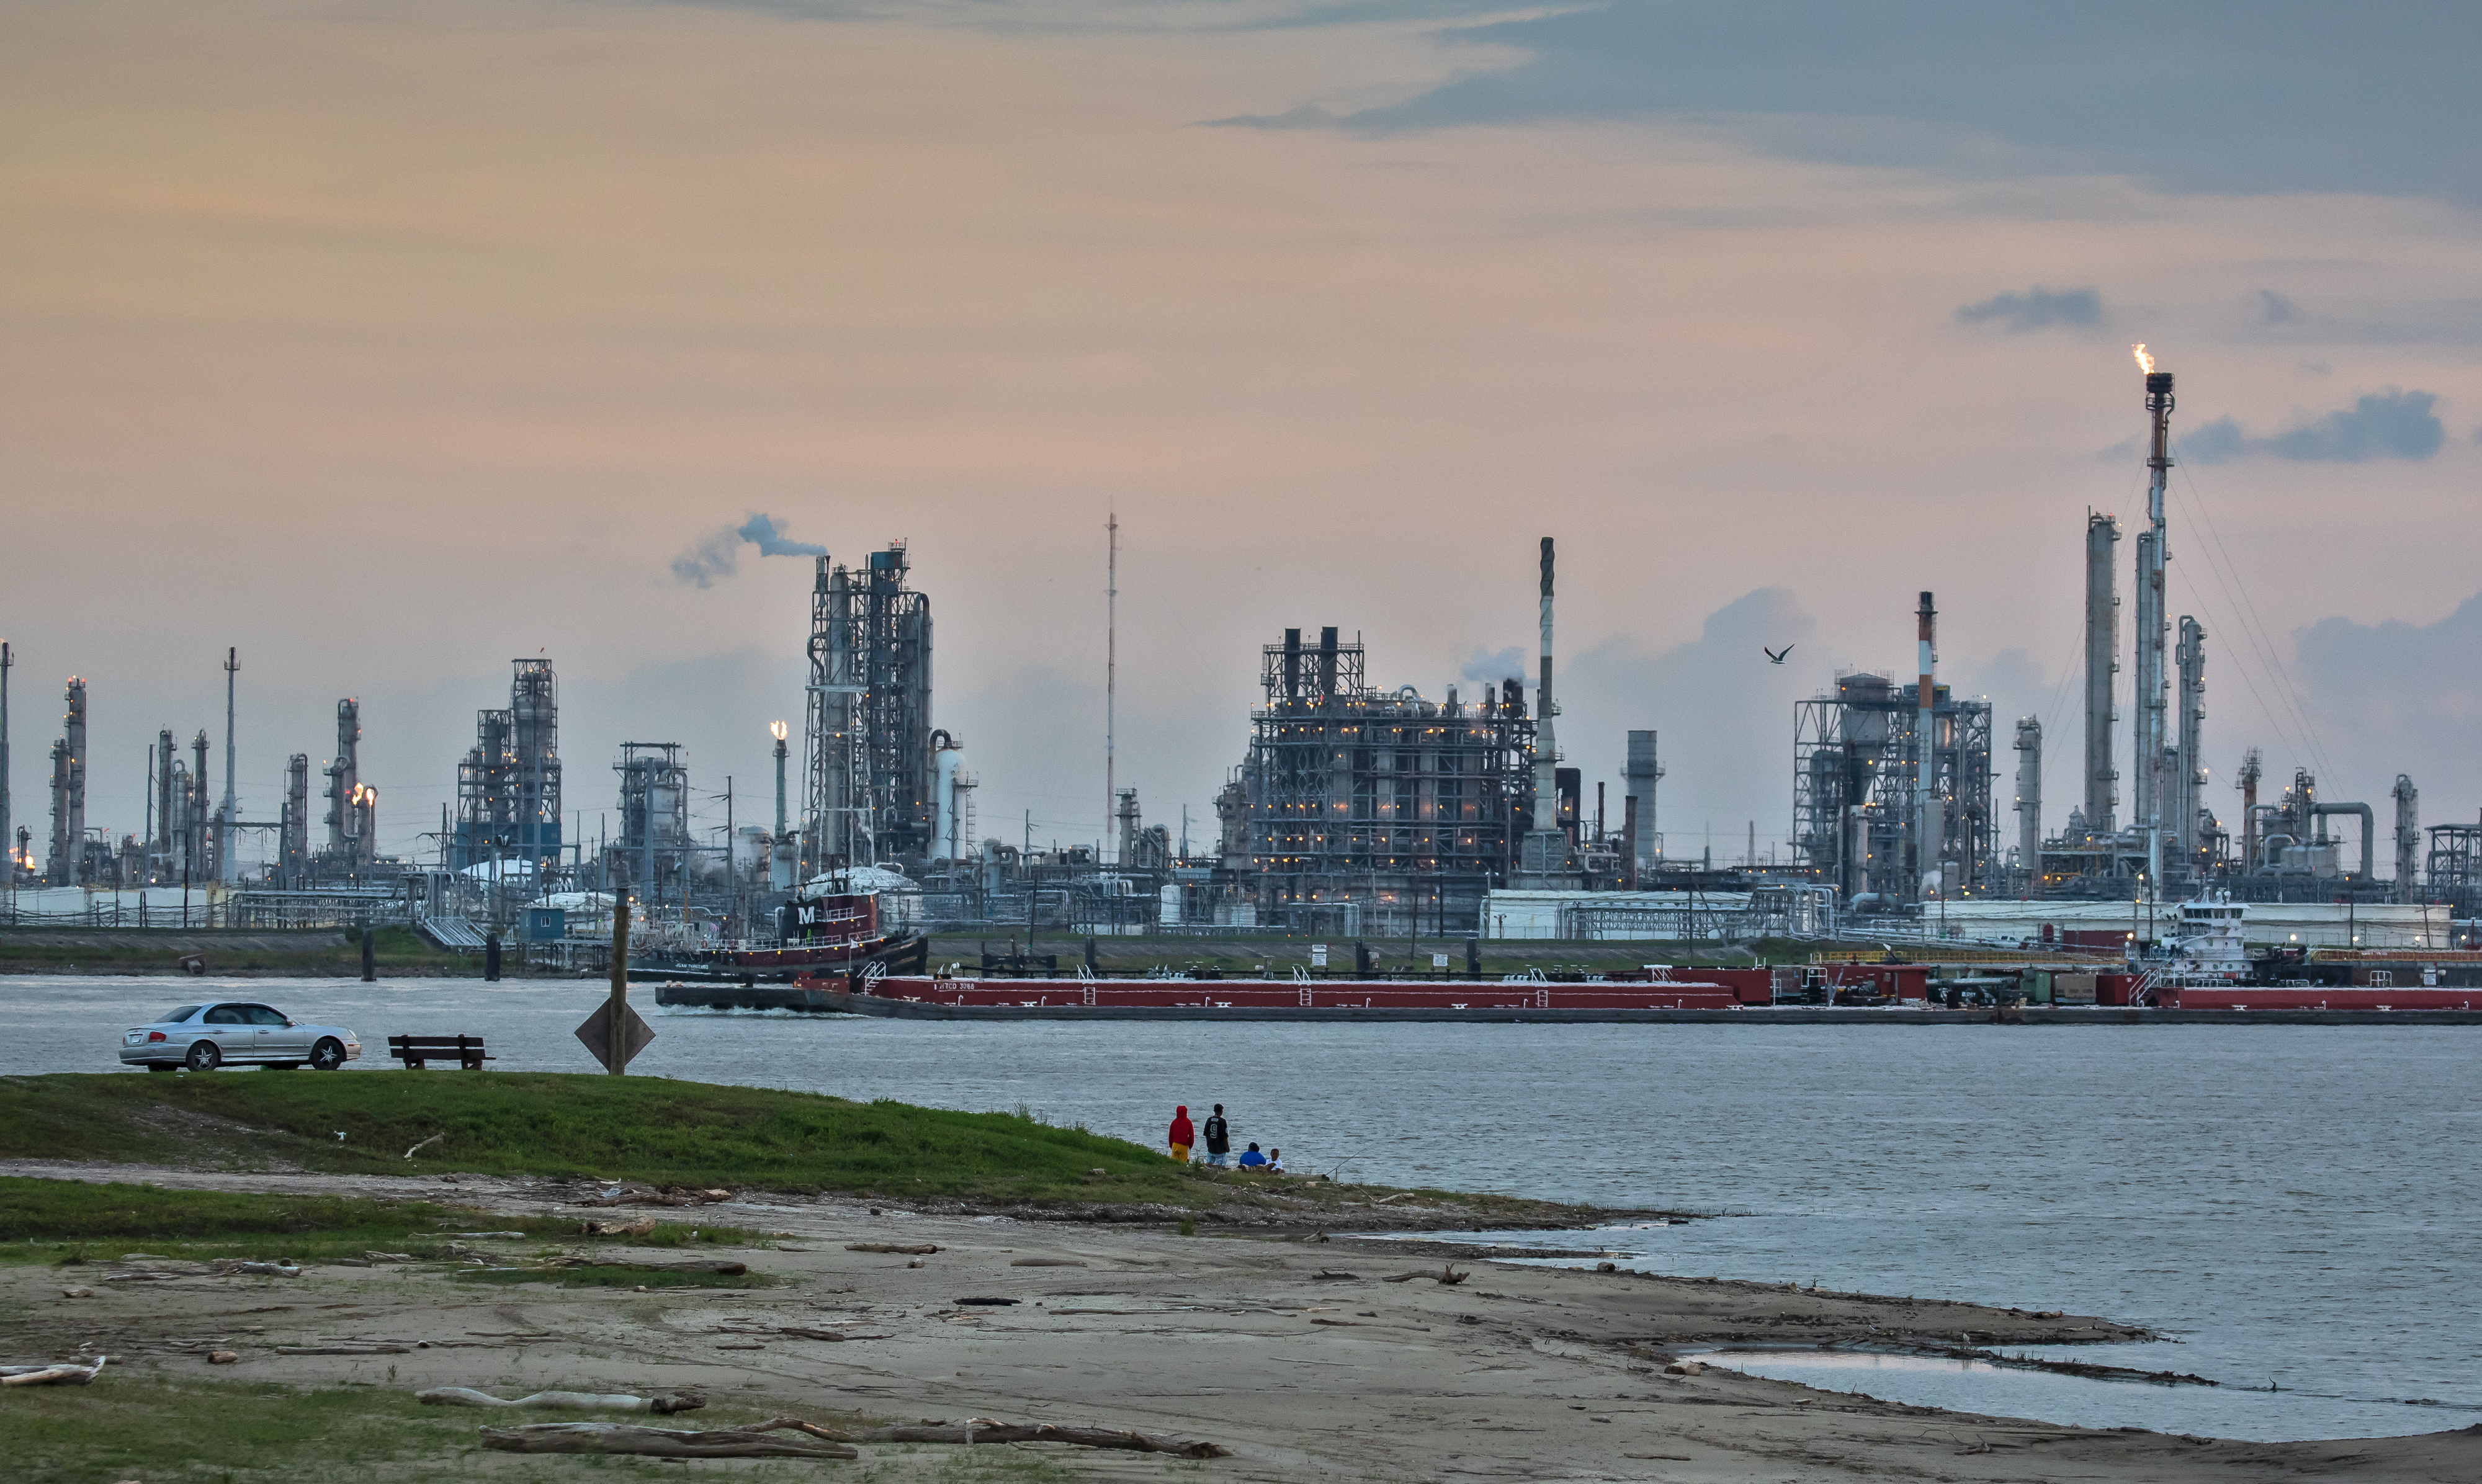 Dow's Hahnville Chemical Plant in Louisiana's 'Cancer Alley' - Photographer Julie Dermansky